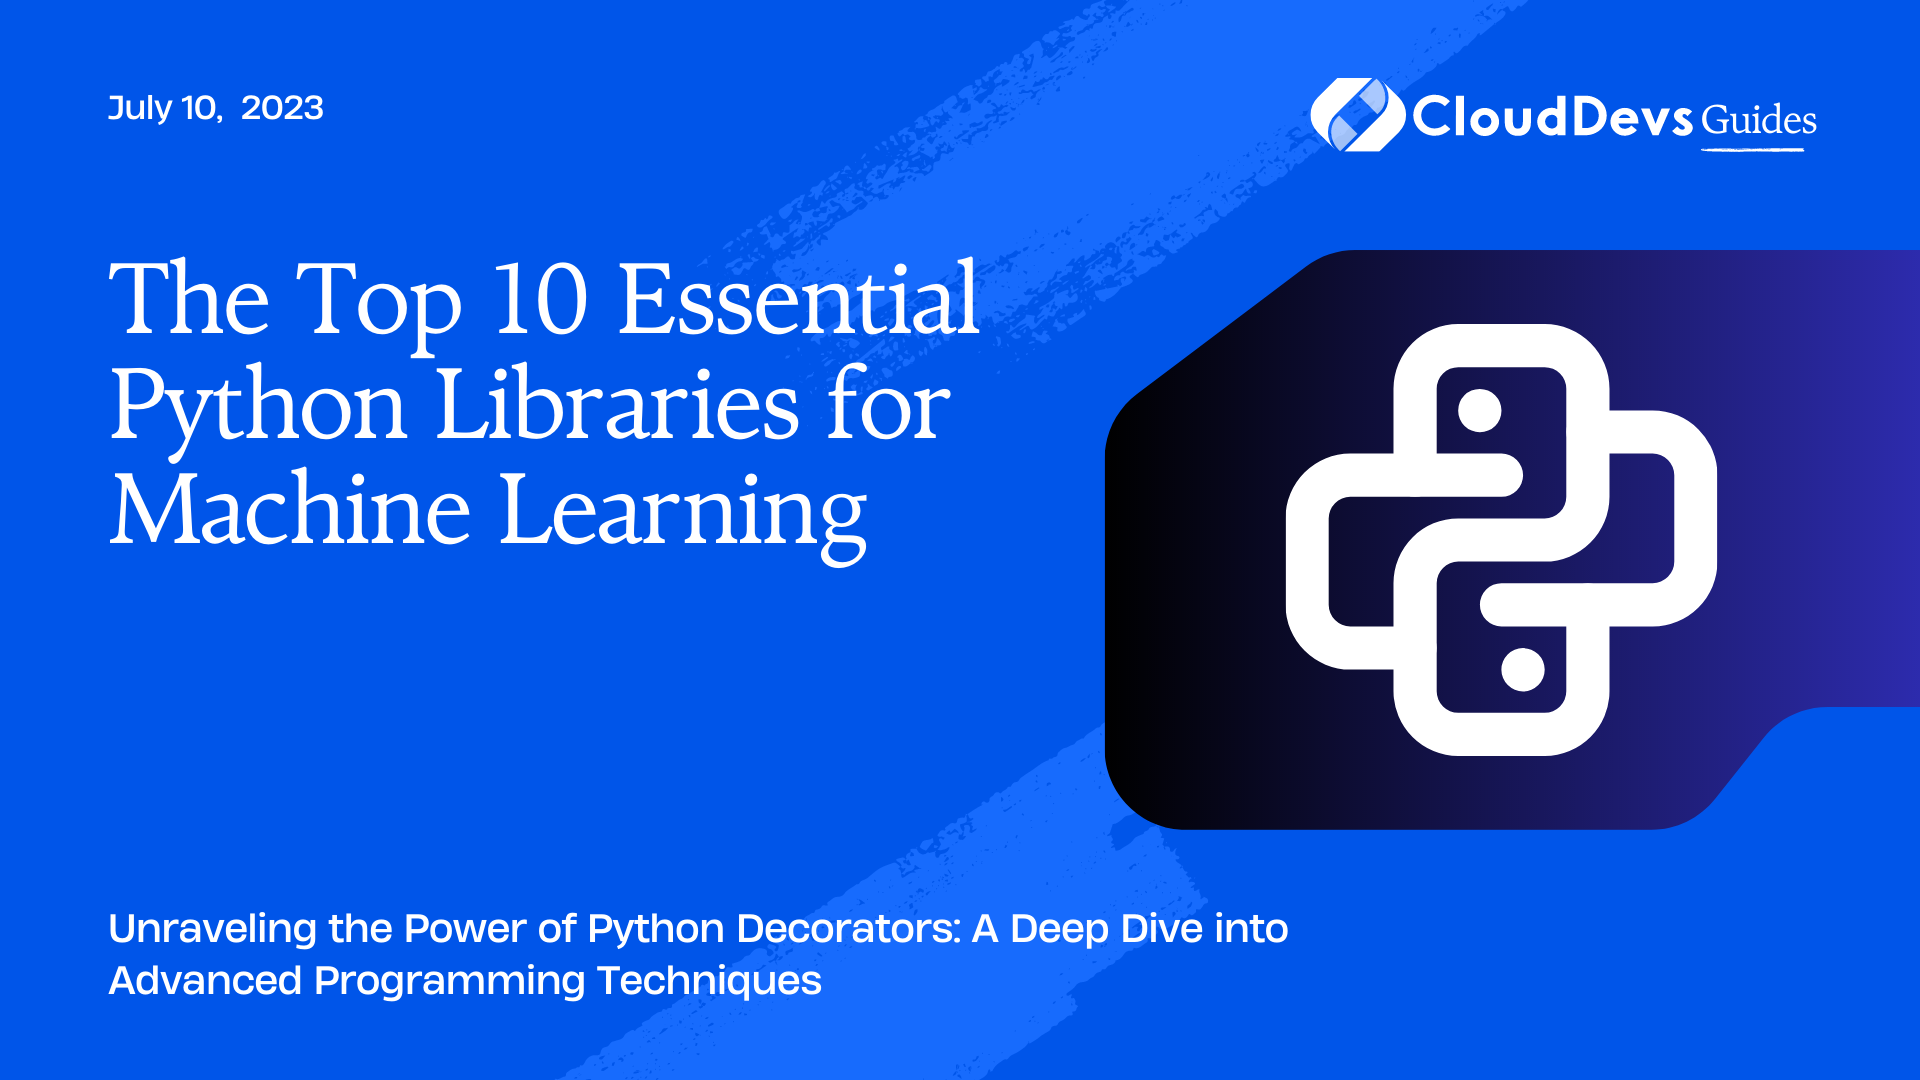 The Top 10 Essential Python Libraries for Machine Learning